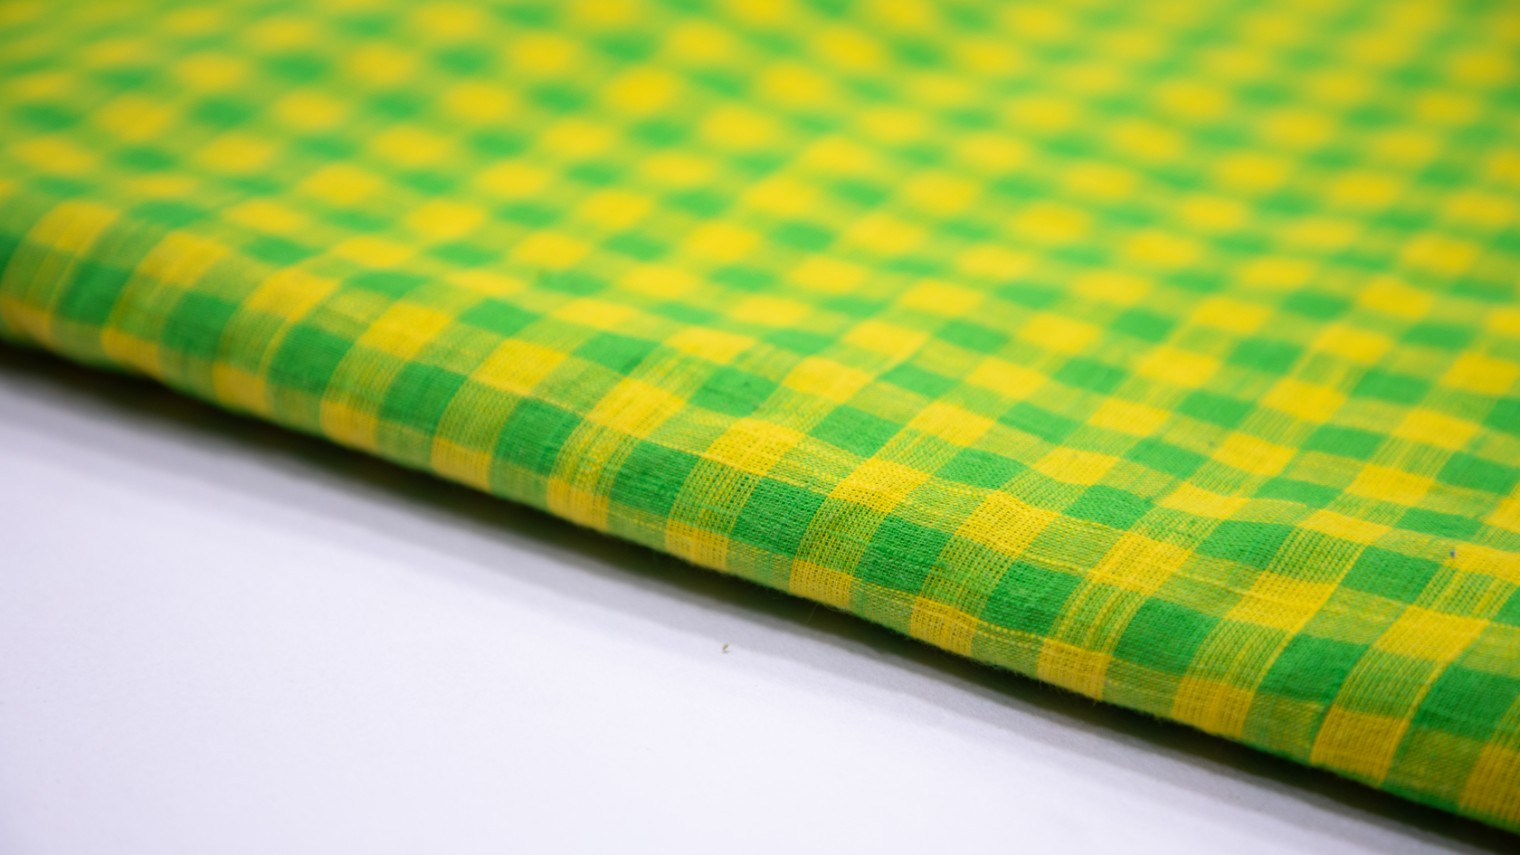 Bright Parrot Green & Lime Yellow Color South Handloom Criss Cross Chex Weave Fabric - 4223